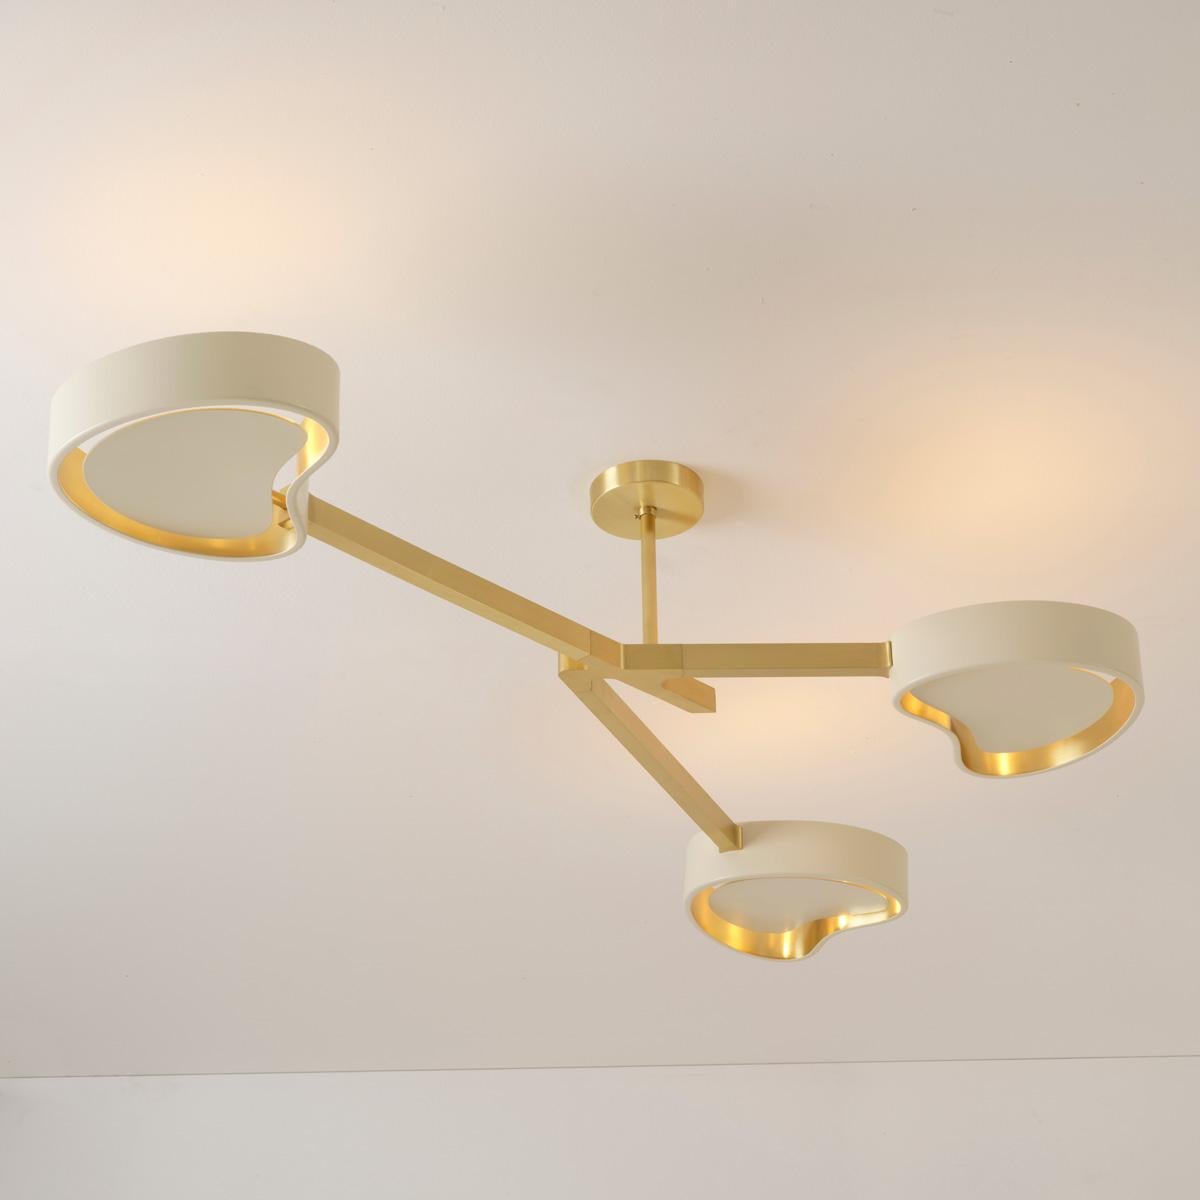 Italian Cuore N.3 Ceiling Light by Gaspare Asaro. Peltro and Bronze Finish For Sale